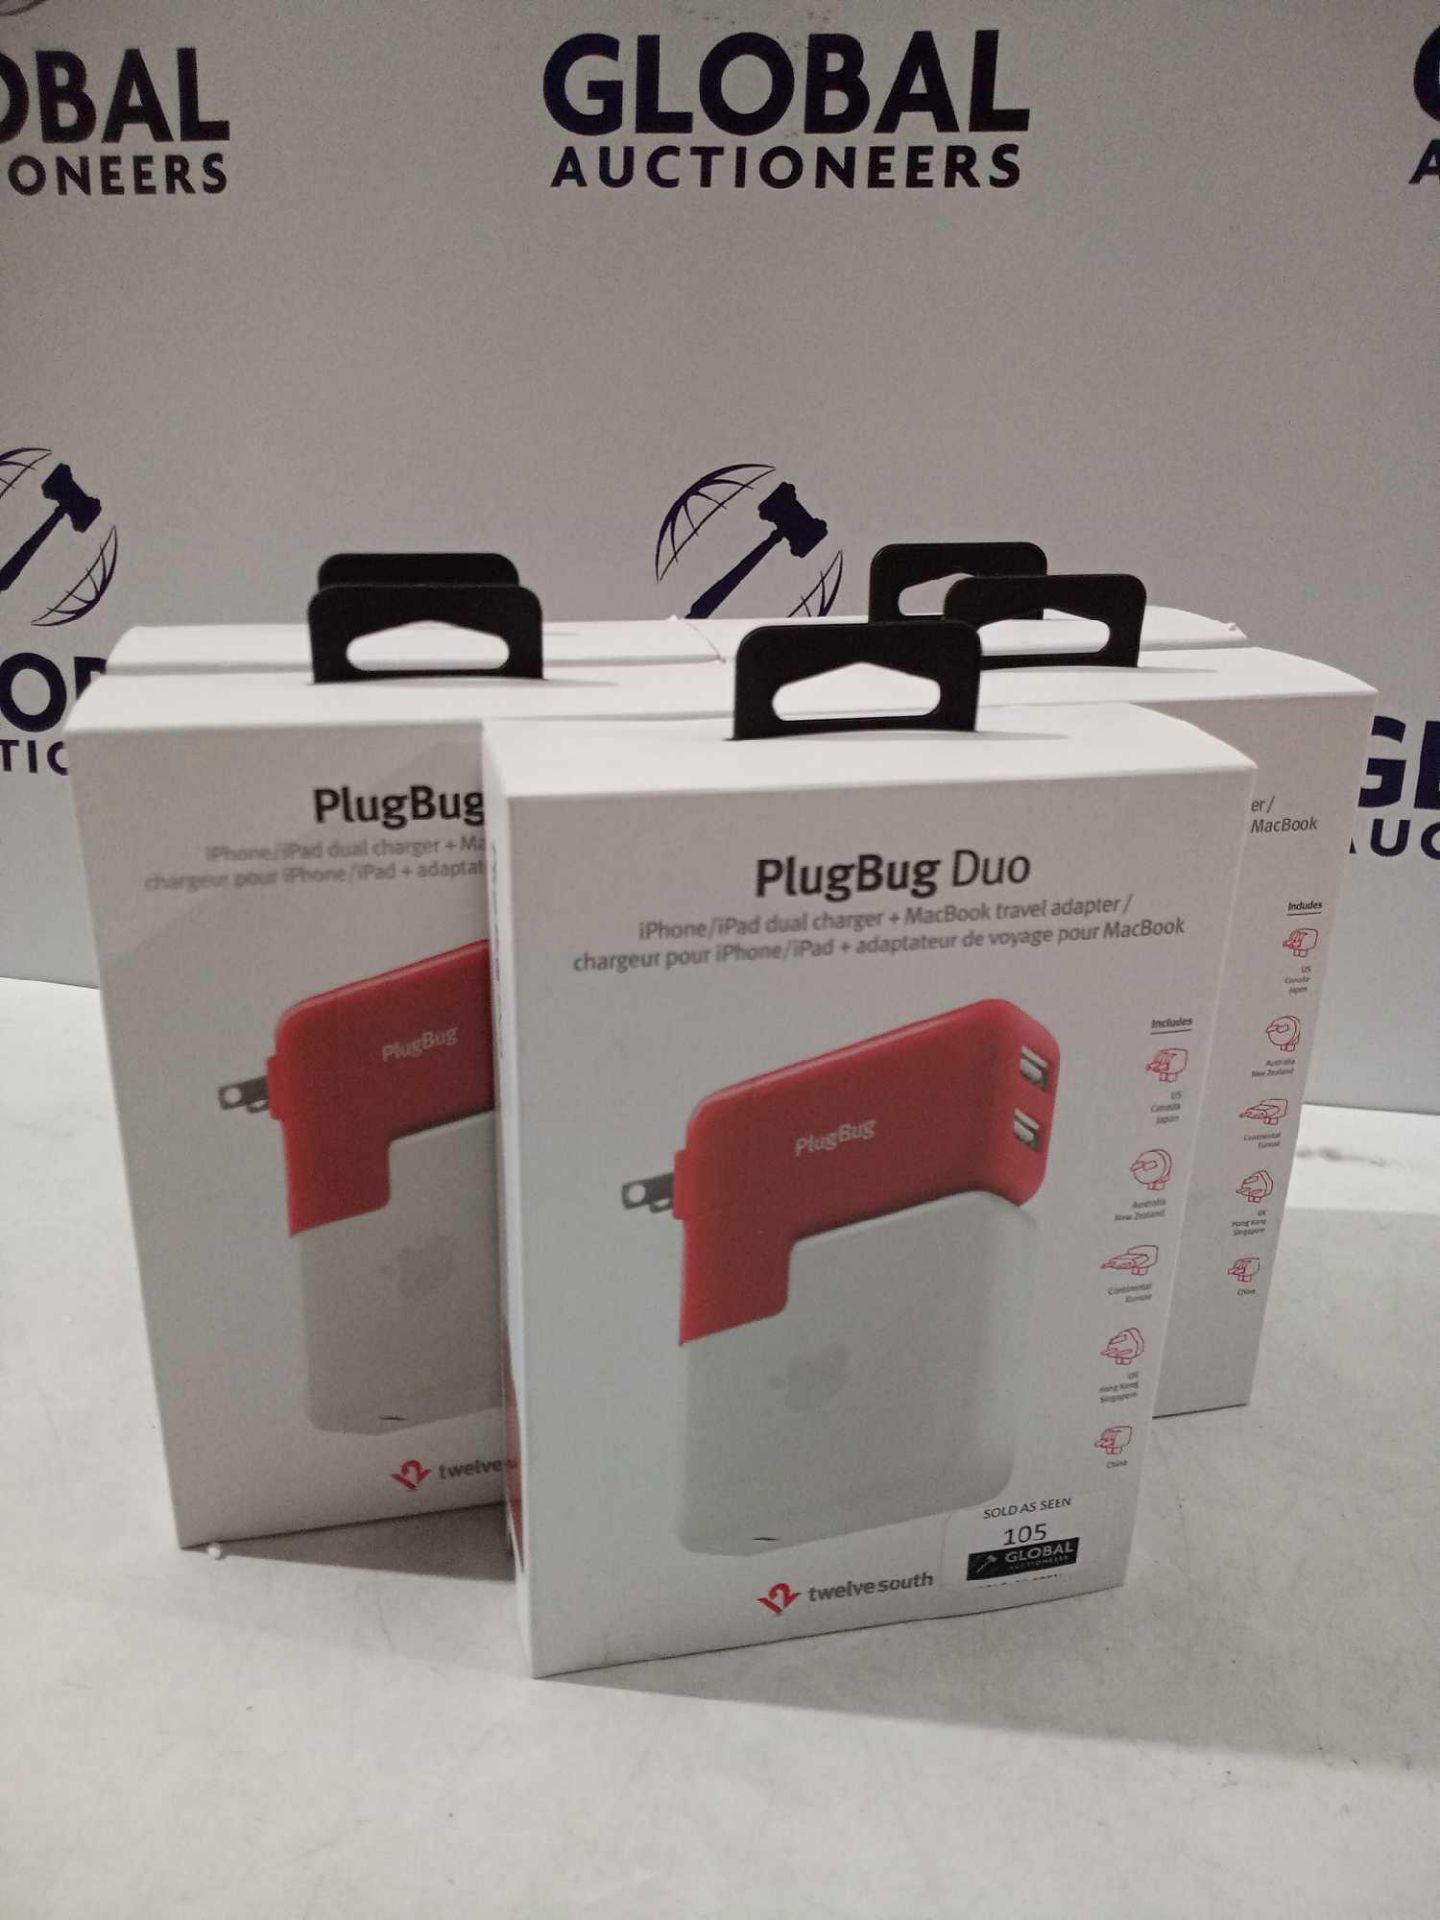 Combined Rrp £200 Lot To Contain 5 Plugbug Duo For Iphone/Ipad And Also Includes Macbook Travel Adap